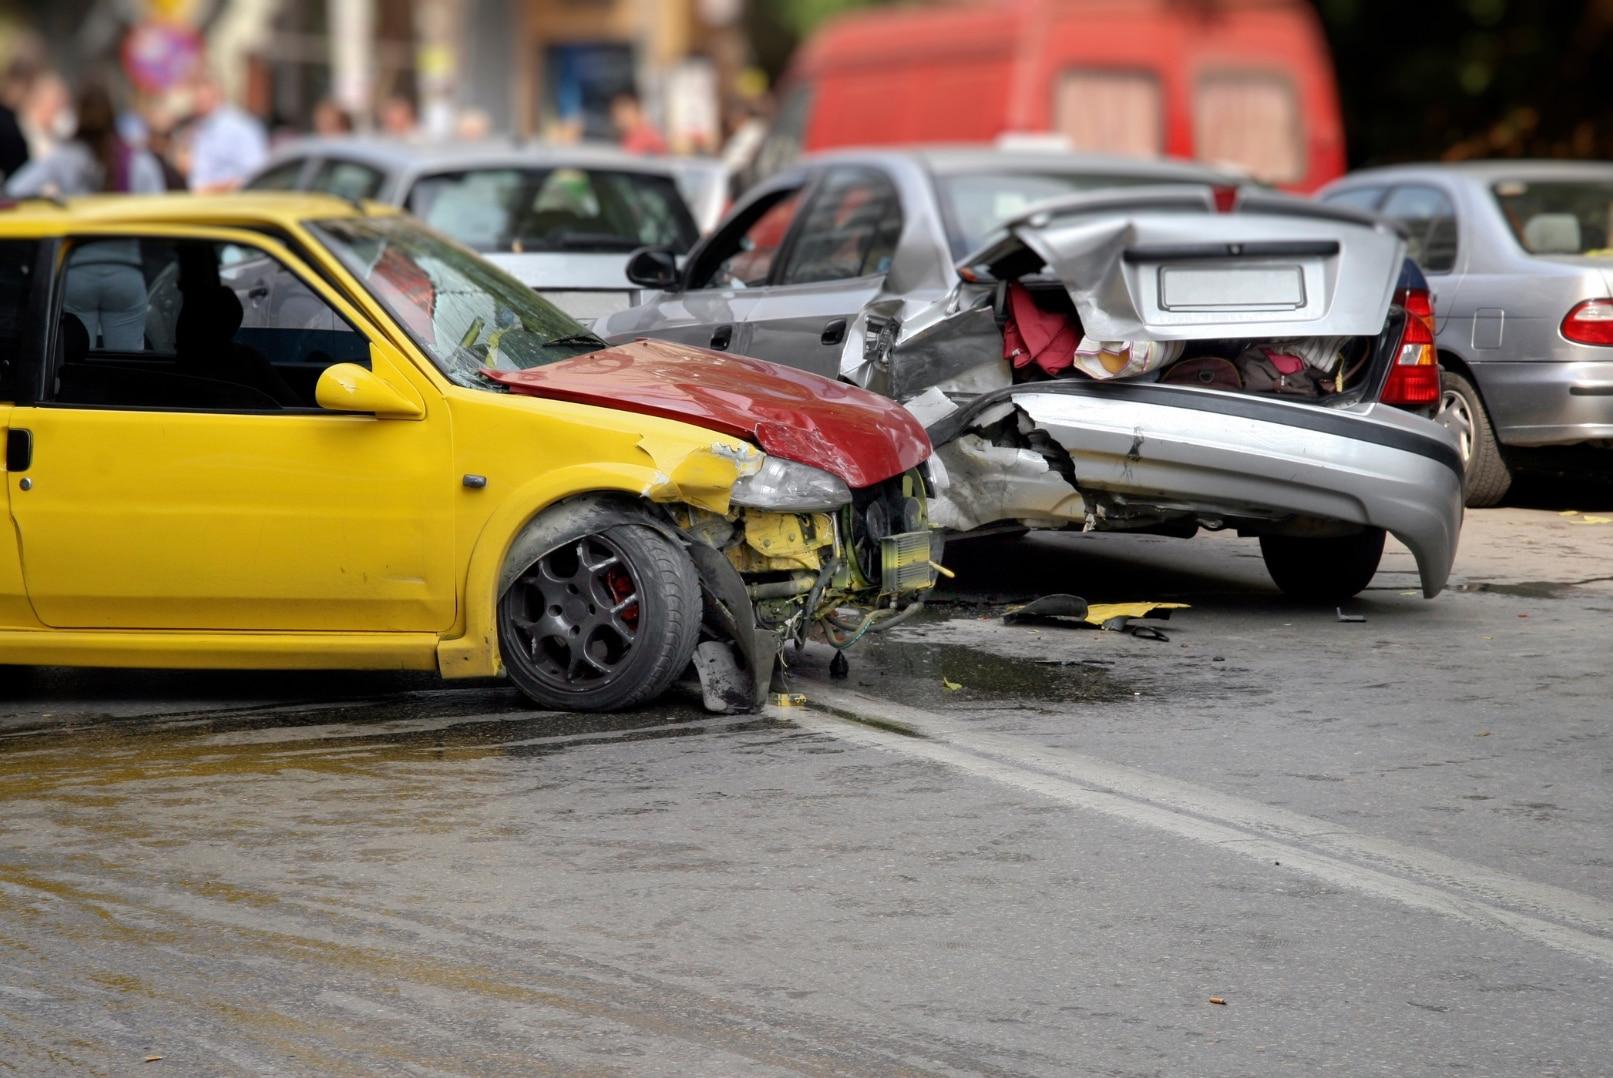 Finding A Stockbridge Car Accident Lawyer